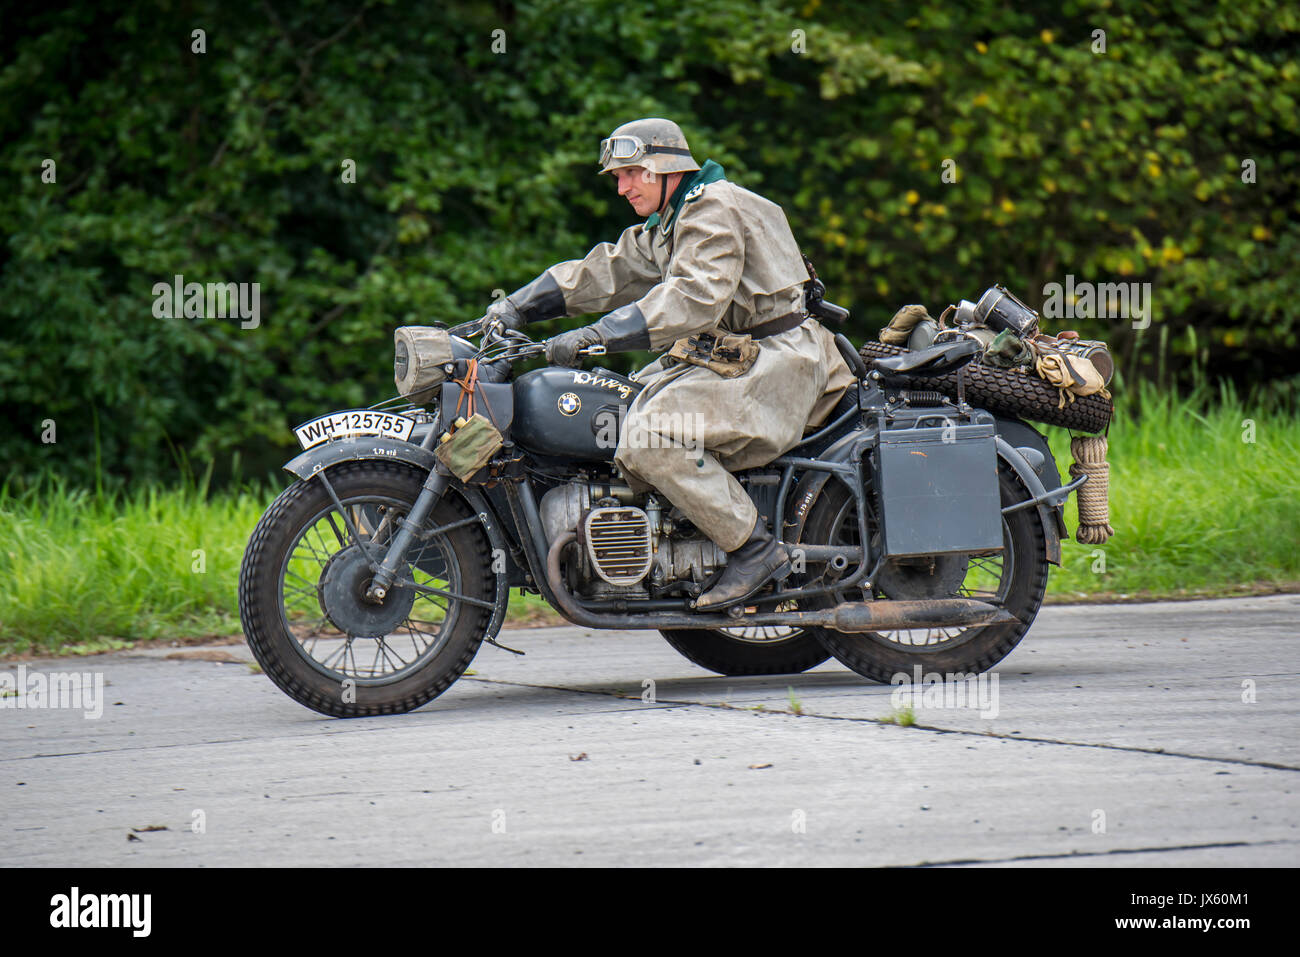 Military Motorcycle With Sidecar